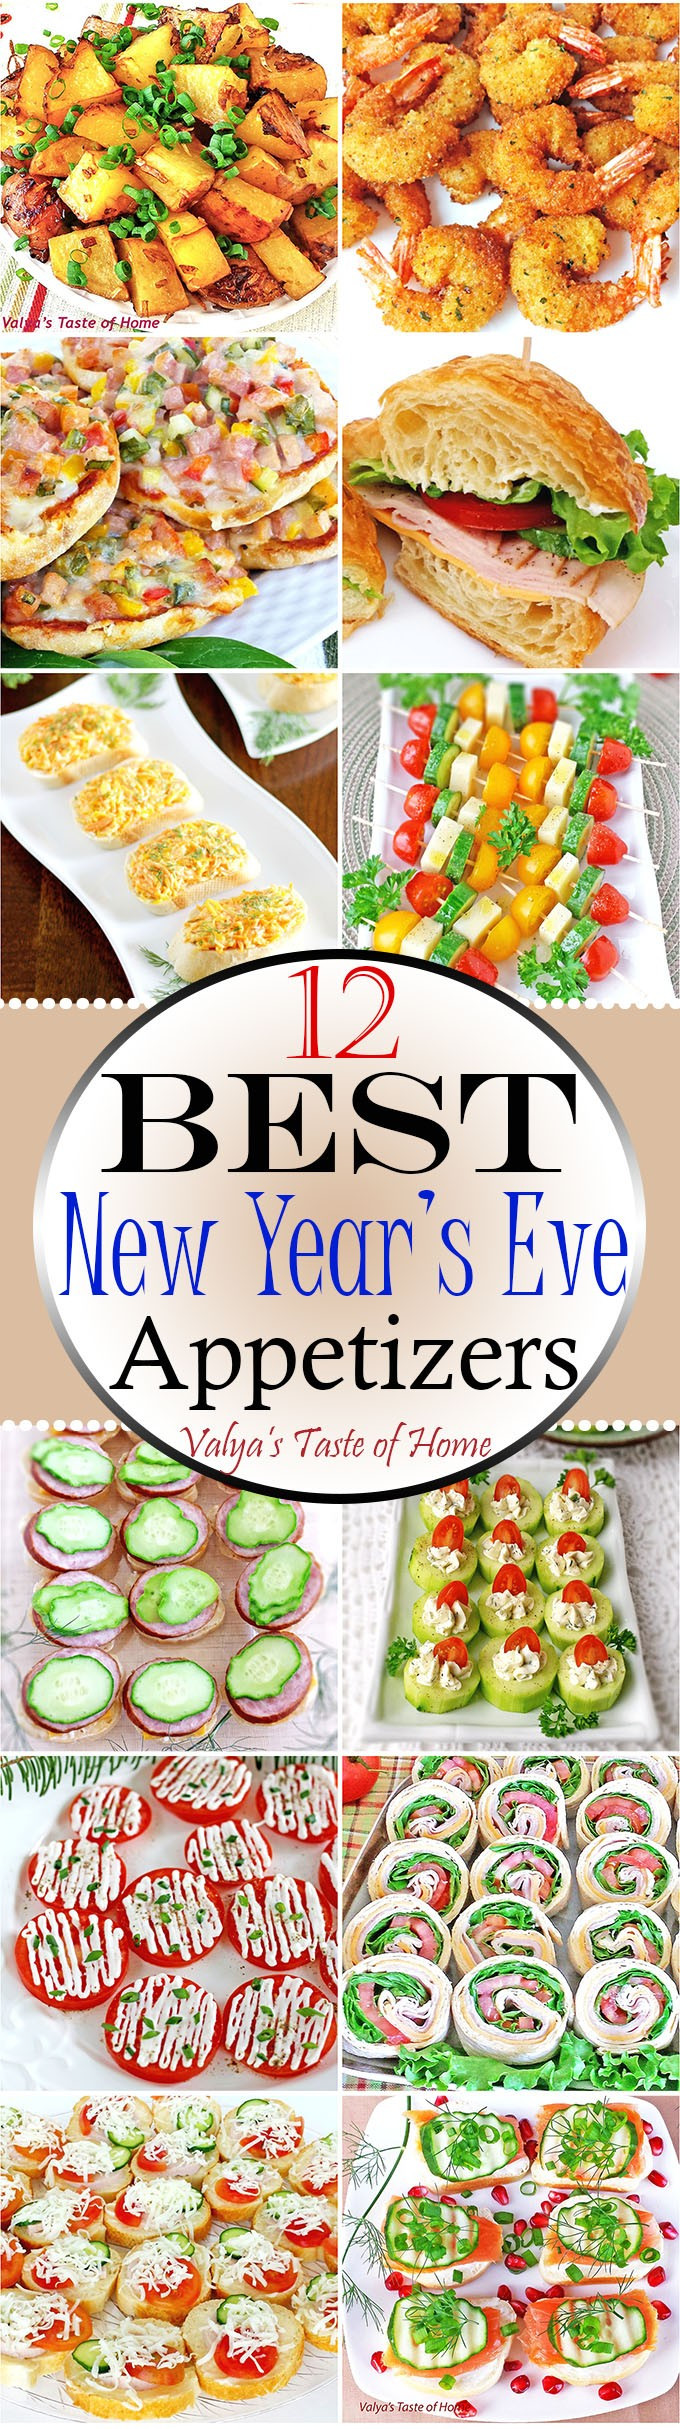 Best New Years Eve Appetizers
 12 Best New Year s Eve Appetizers Valya s Taste of Home